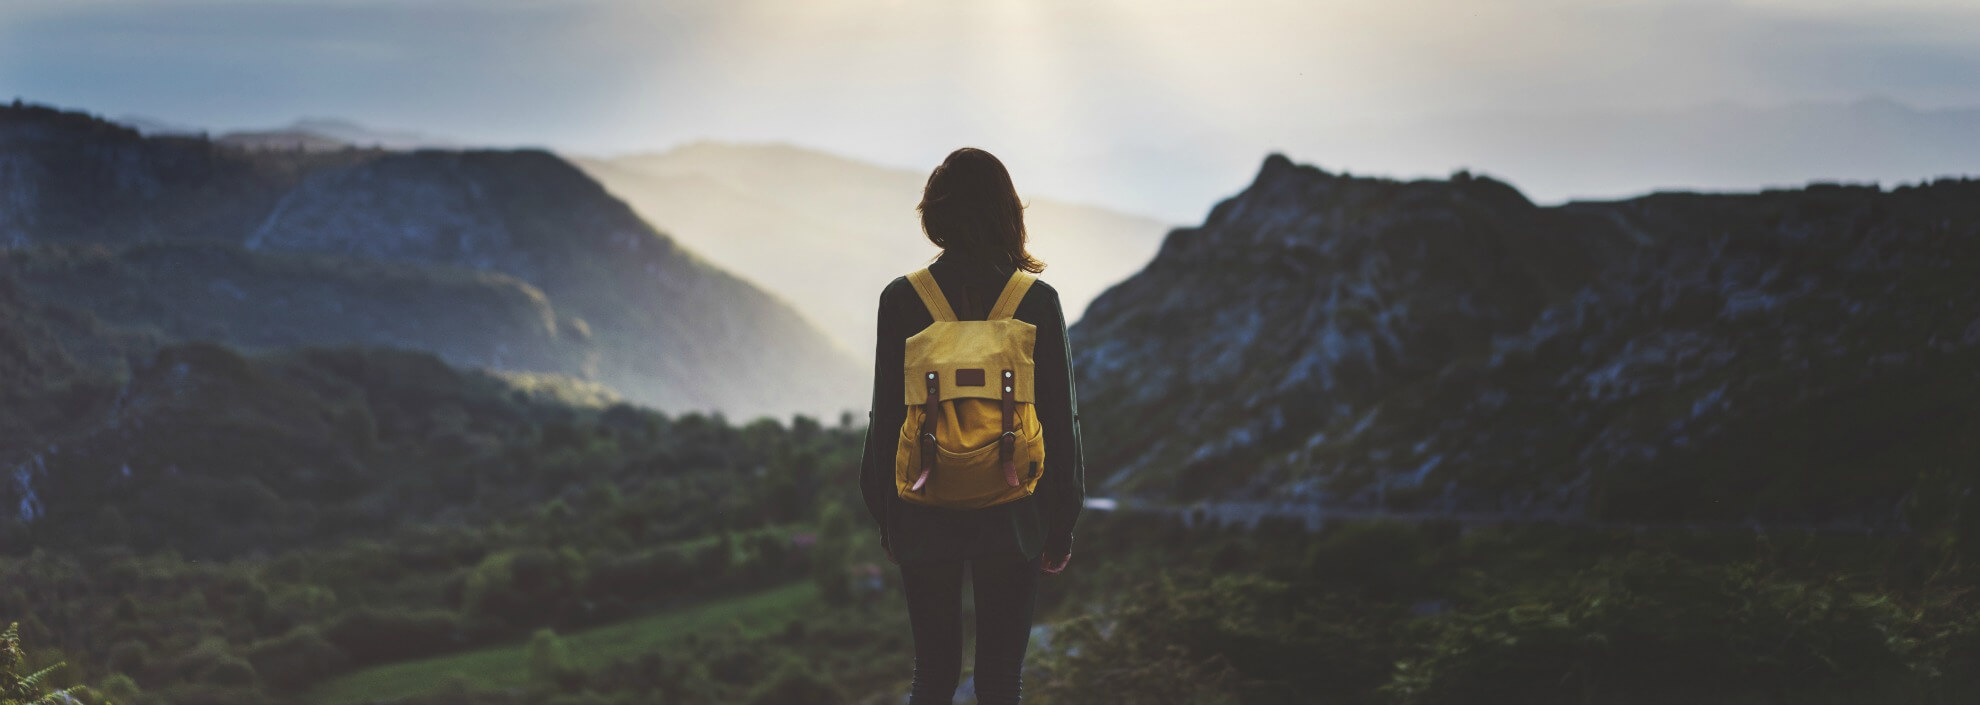 Woman standing on a mountain wearing a yellow rucksack